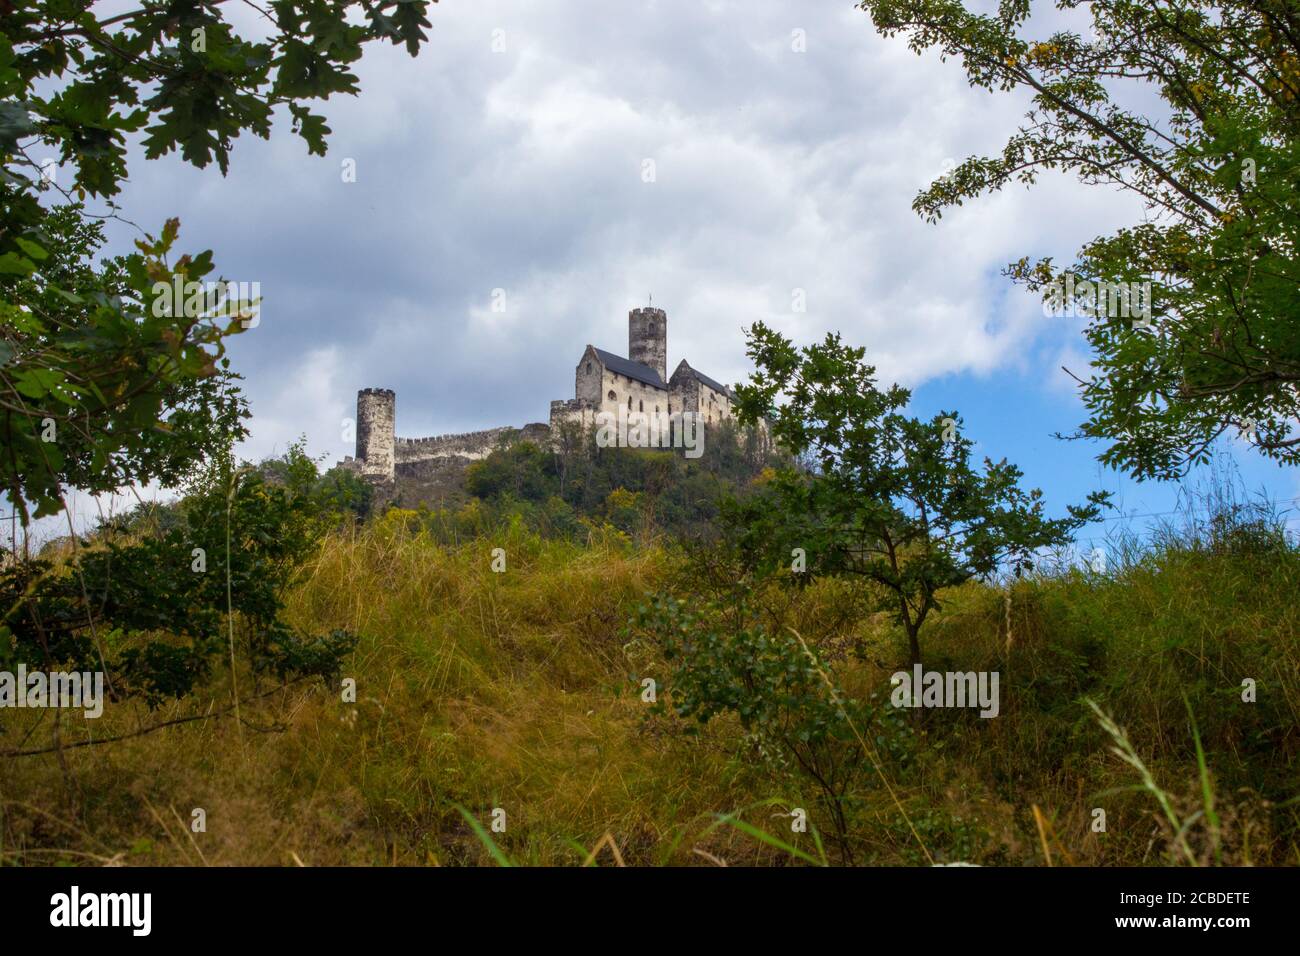 Panoramic view of Bezdez castle in the Czech Republic. In the foreground there are trees, in the background is a hill with castle and there are a whit Stock Photo